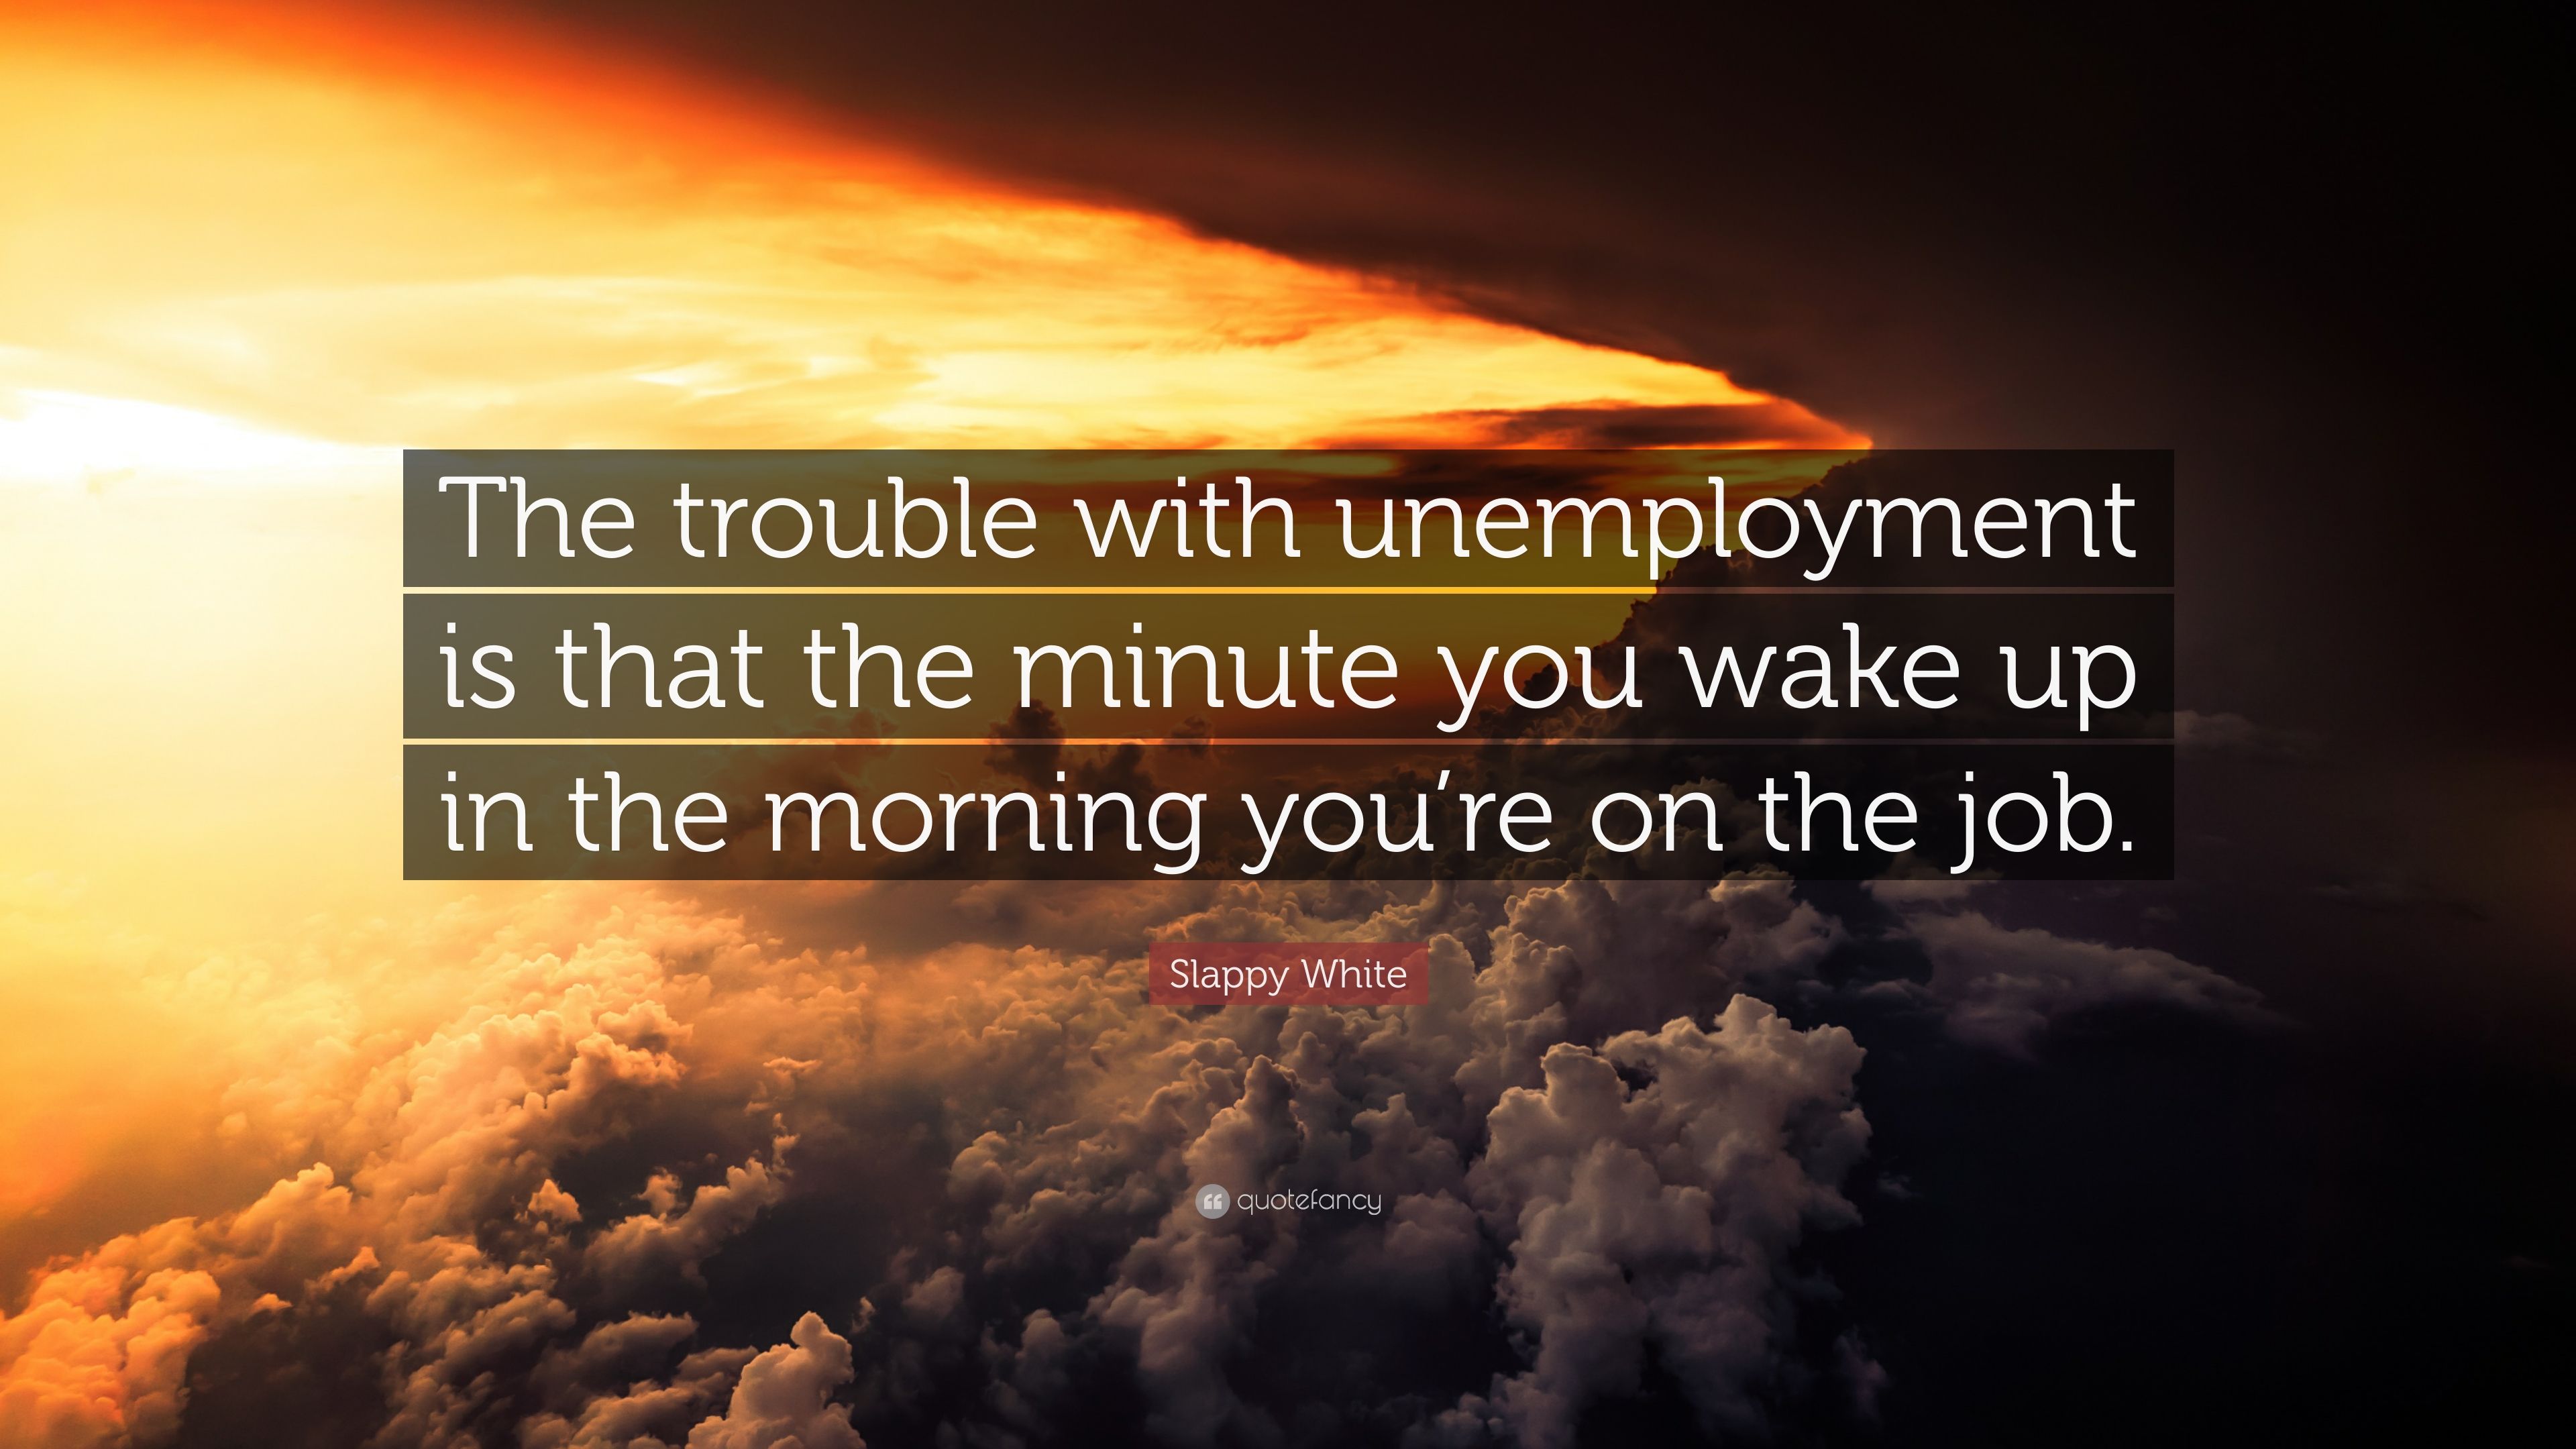 Slappy White Quote: “The trouble with unemployment is that the minute you wake up in the morning you're on the job.” (7 wallpaper)